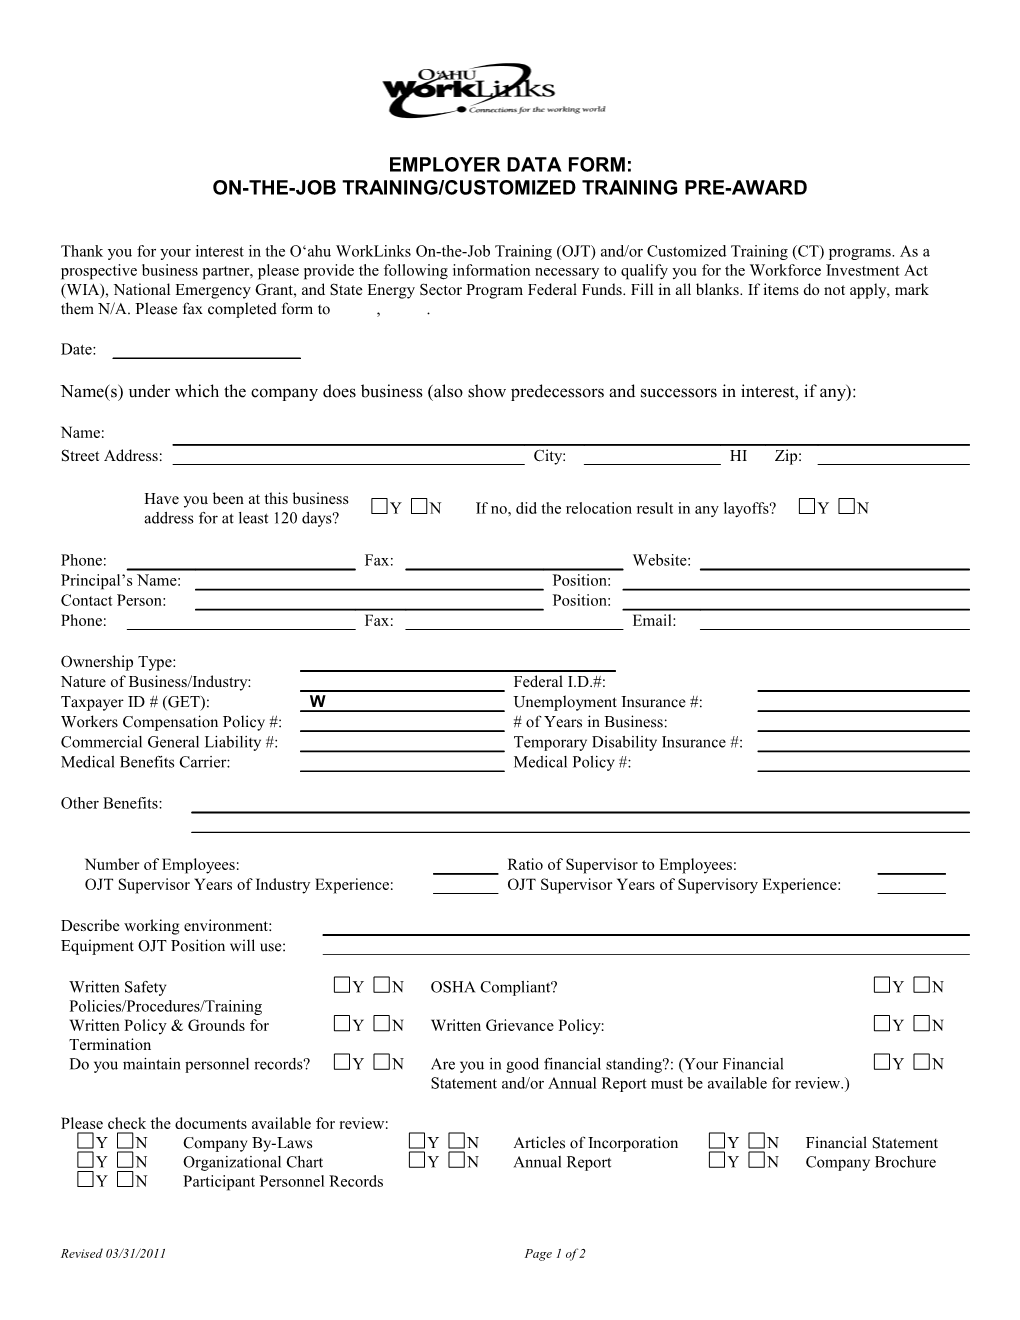 BUSINESS SERVICES Employer Data Form: On-The-Job Training/Customized Training Application